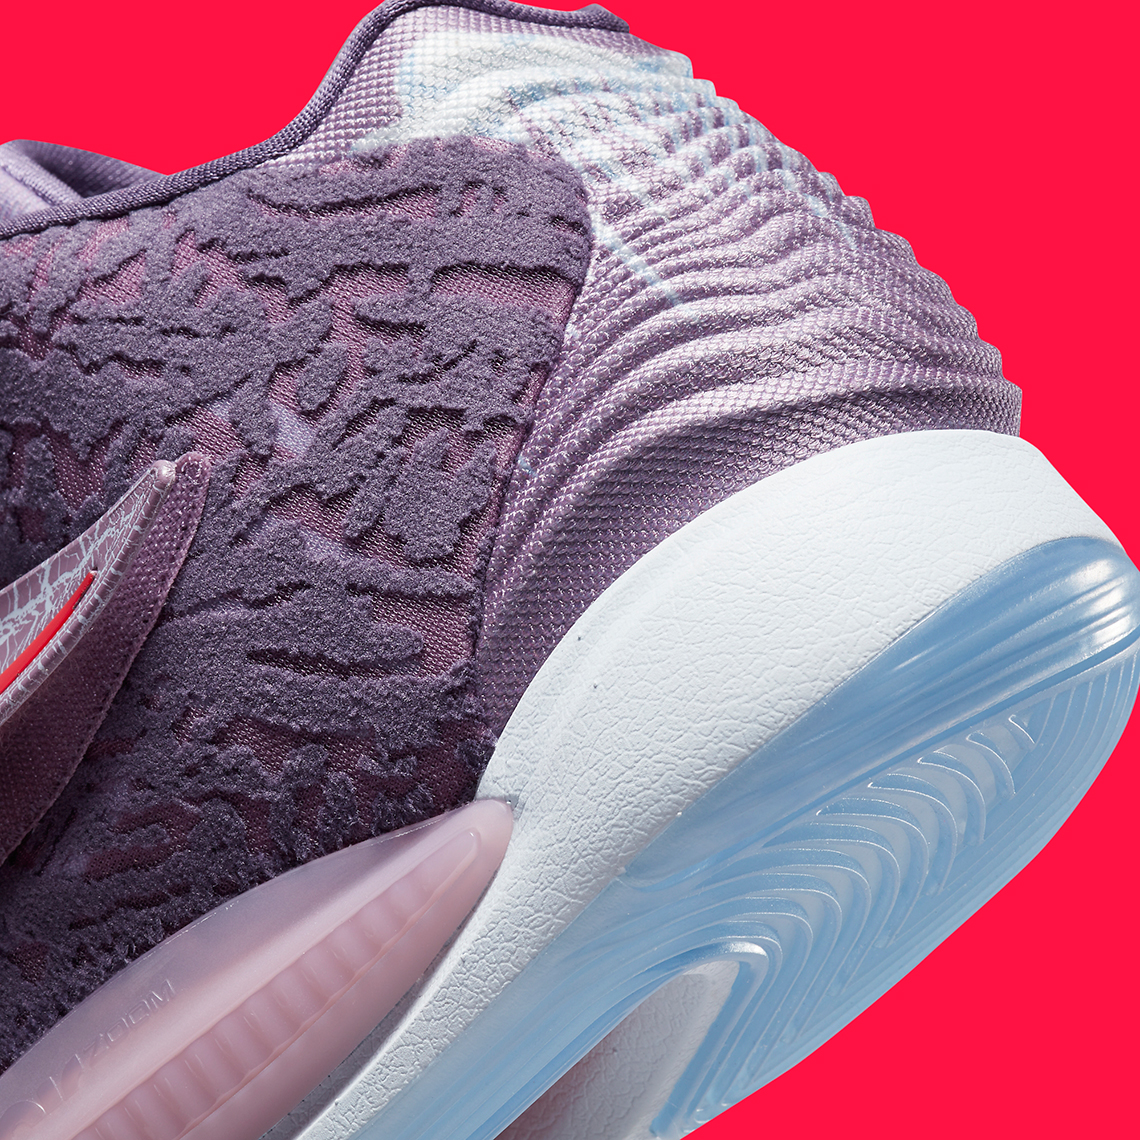 Nike Kd 14 Valentines Day Release Date 8